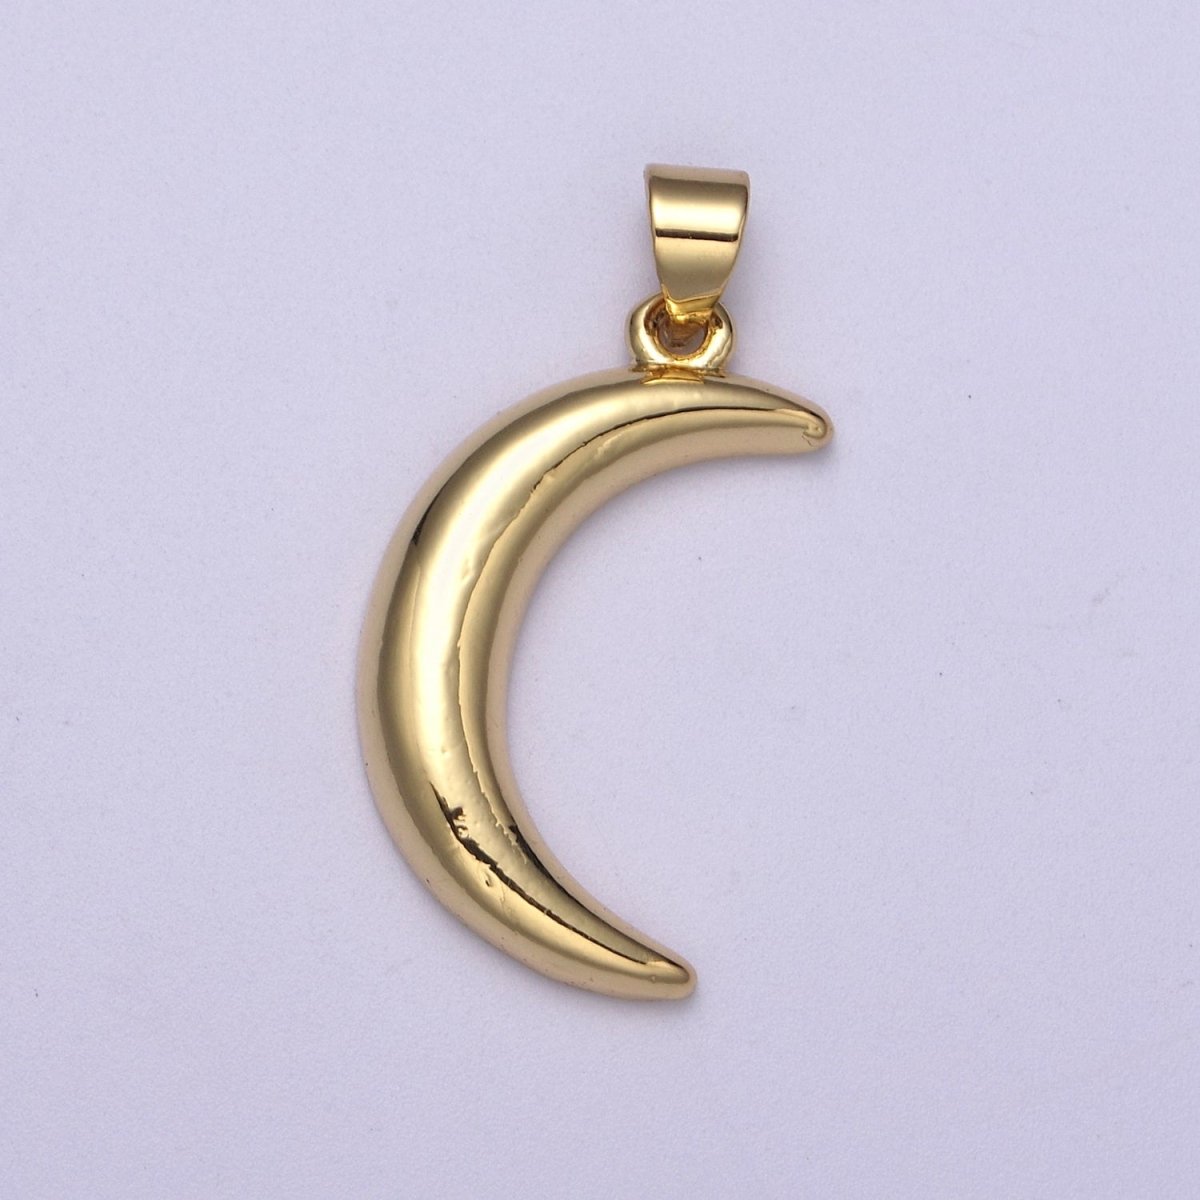 Gold Moon Charm, Dainty Crescent Moon Add a Charm on Necklace or Bracelet, Celestial Jewelry, Light Pendant H-170 - DLUXCA